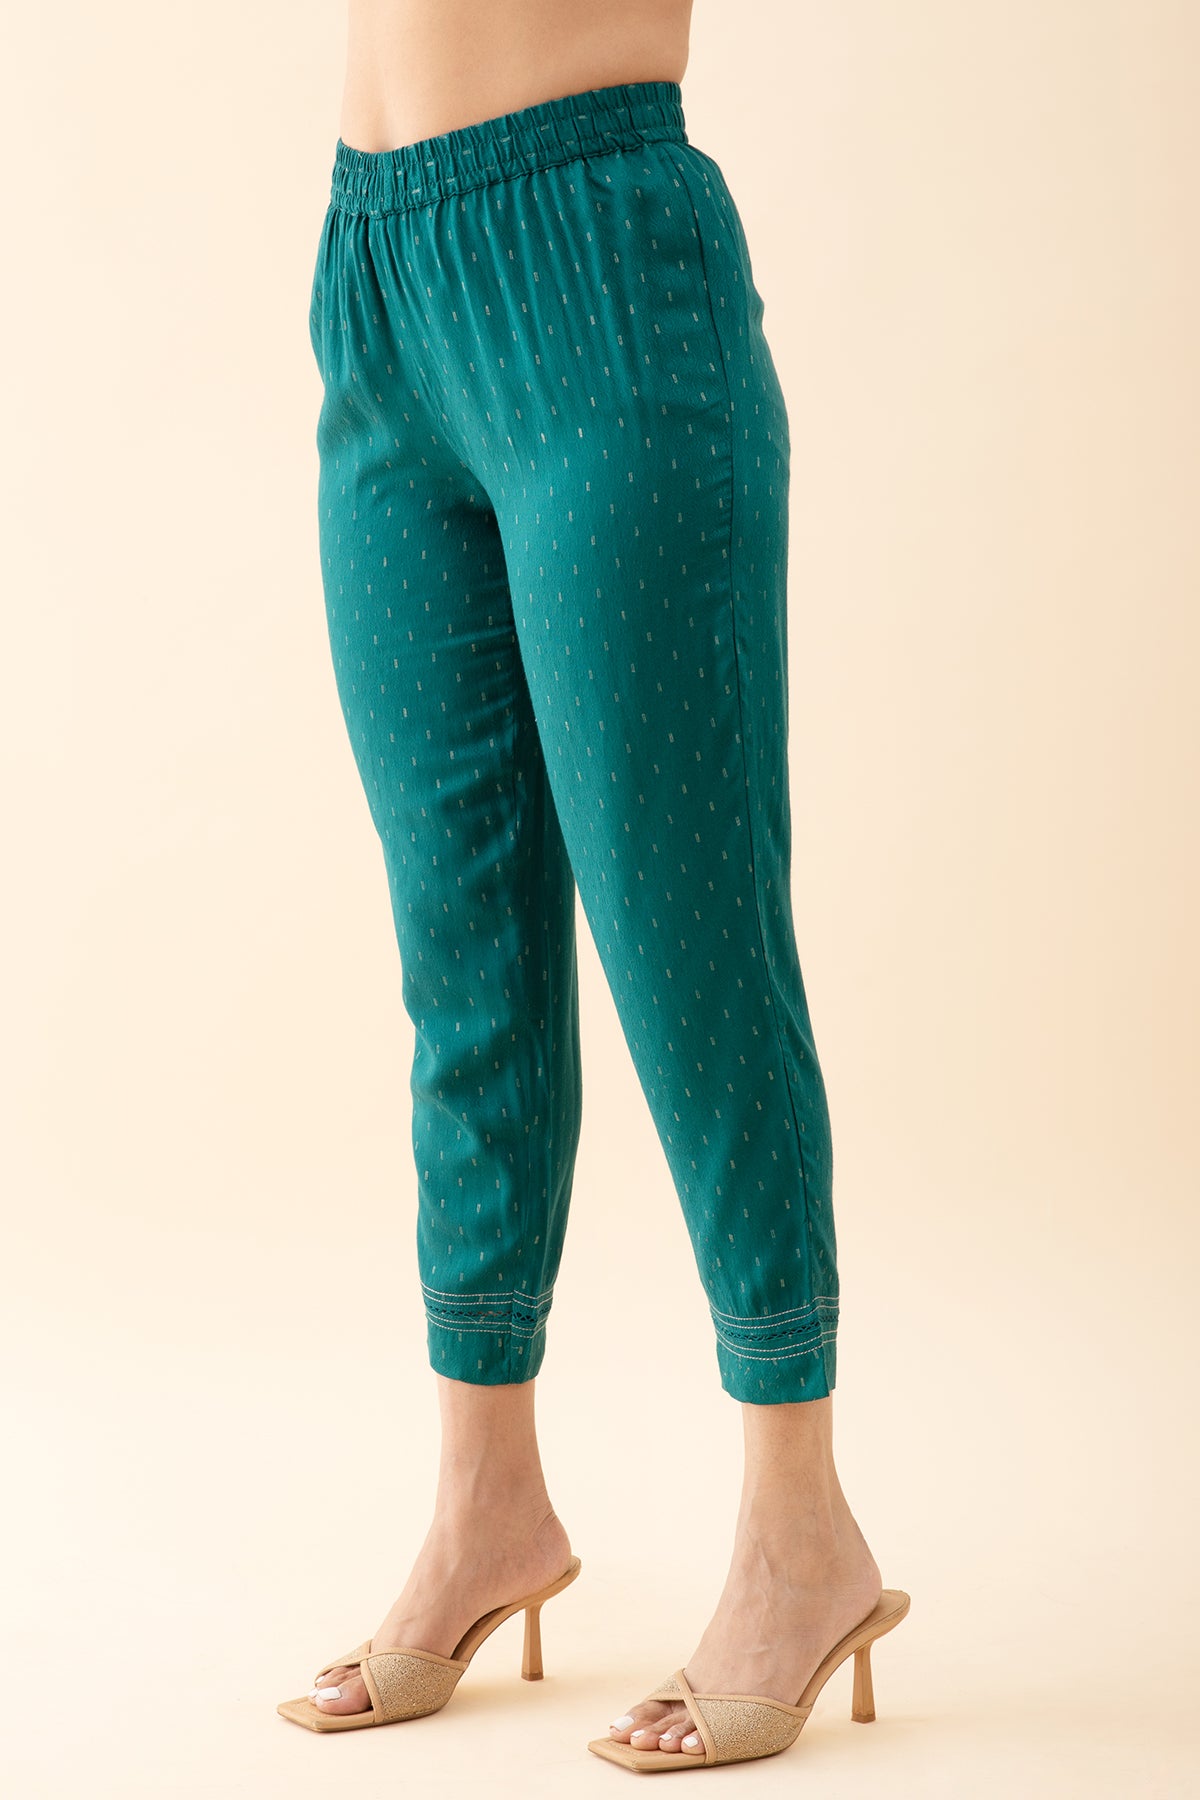 Textured Dobby with Contrast Floral Embroidered Yoke - Teal Green